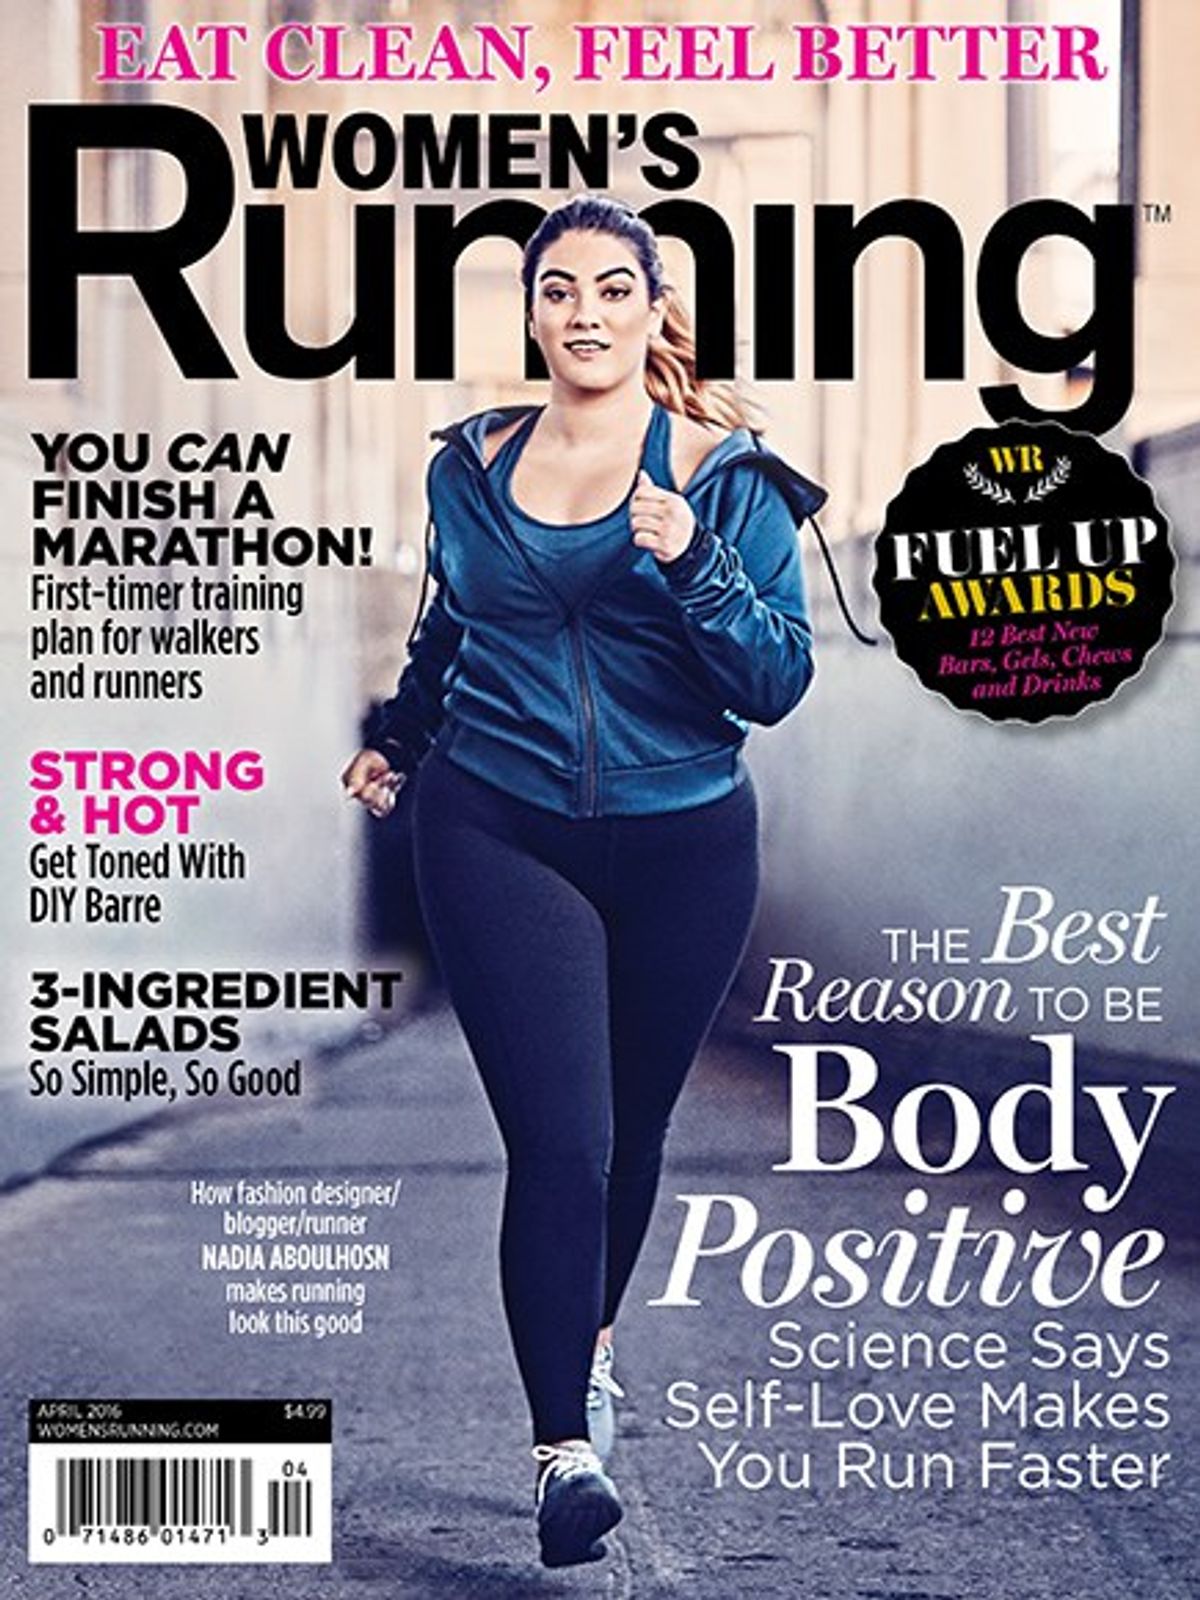 Women's Running Magazine Uses A Plus-Sized Cover Model